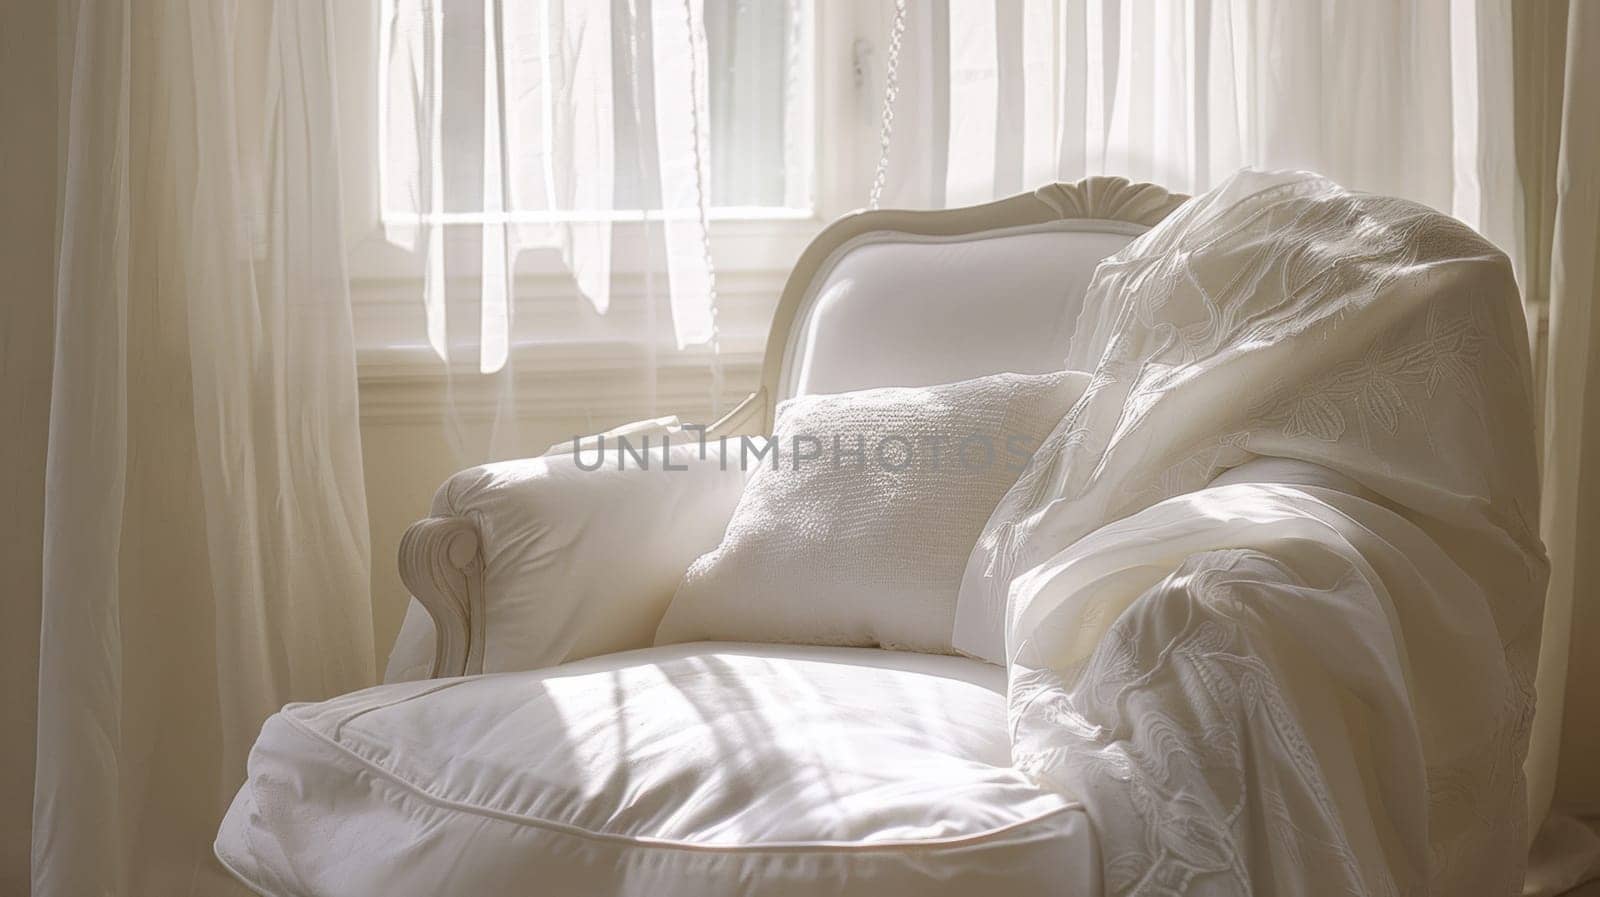 A white chair with a blanket draped over it in front of the window